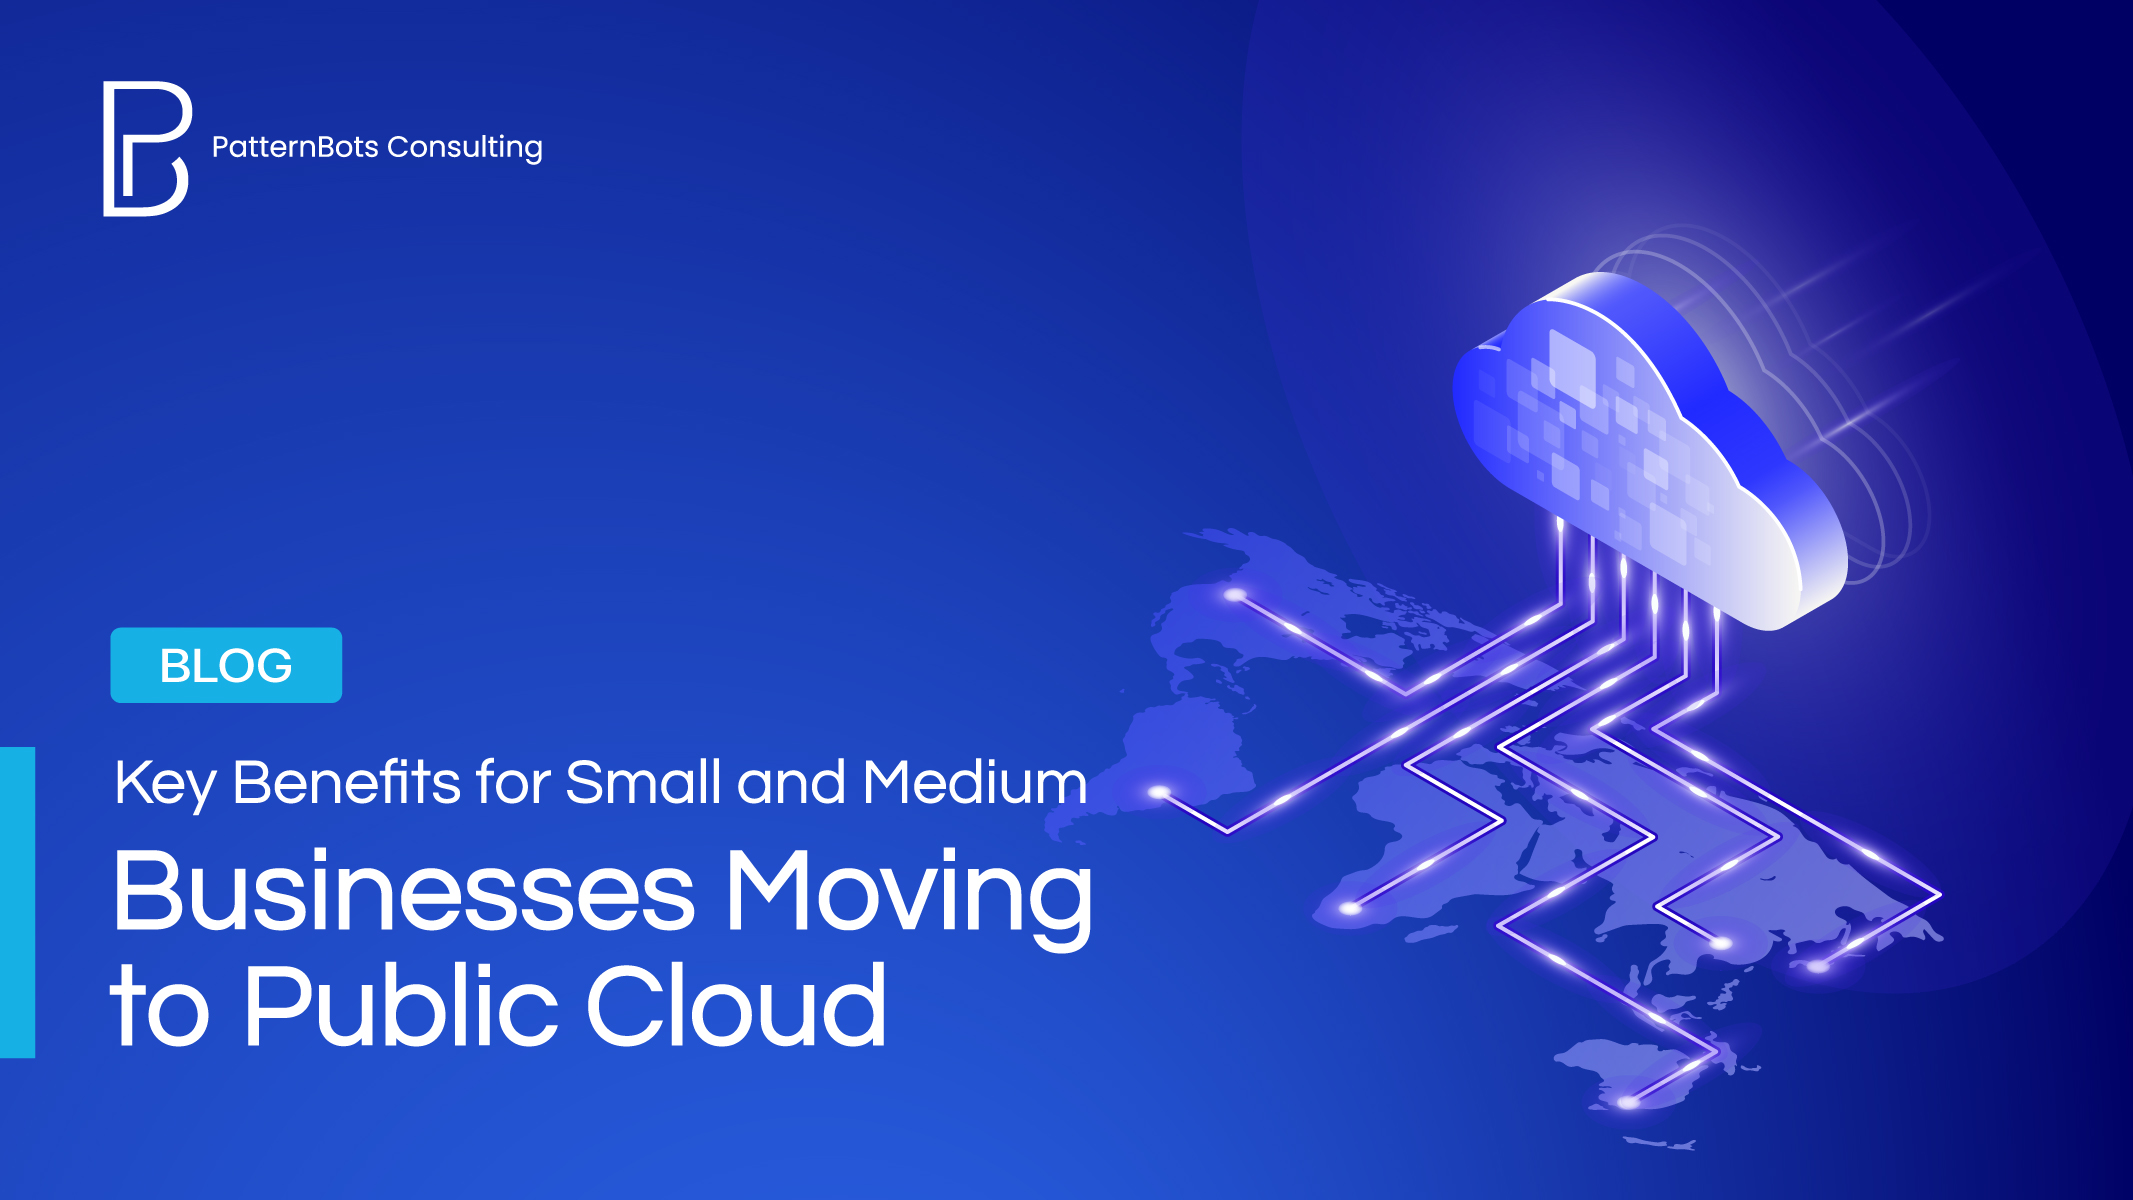 Key Benefits for Small and Medium Businesses Moving to Public Cloud- PatternBots